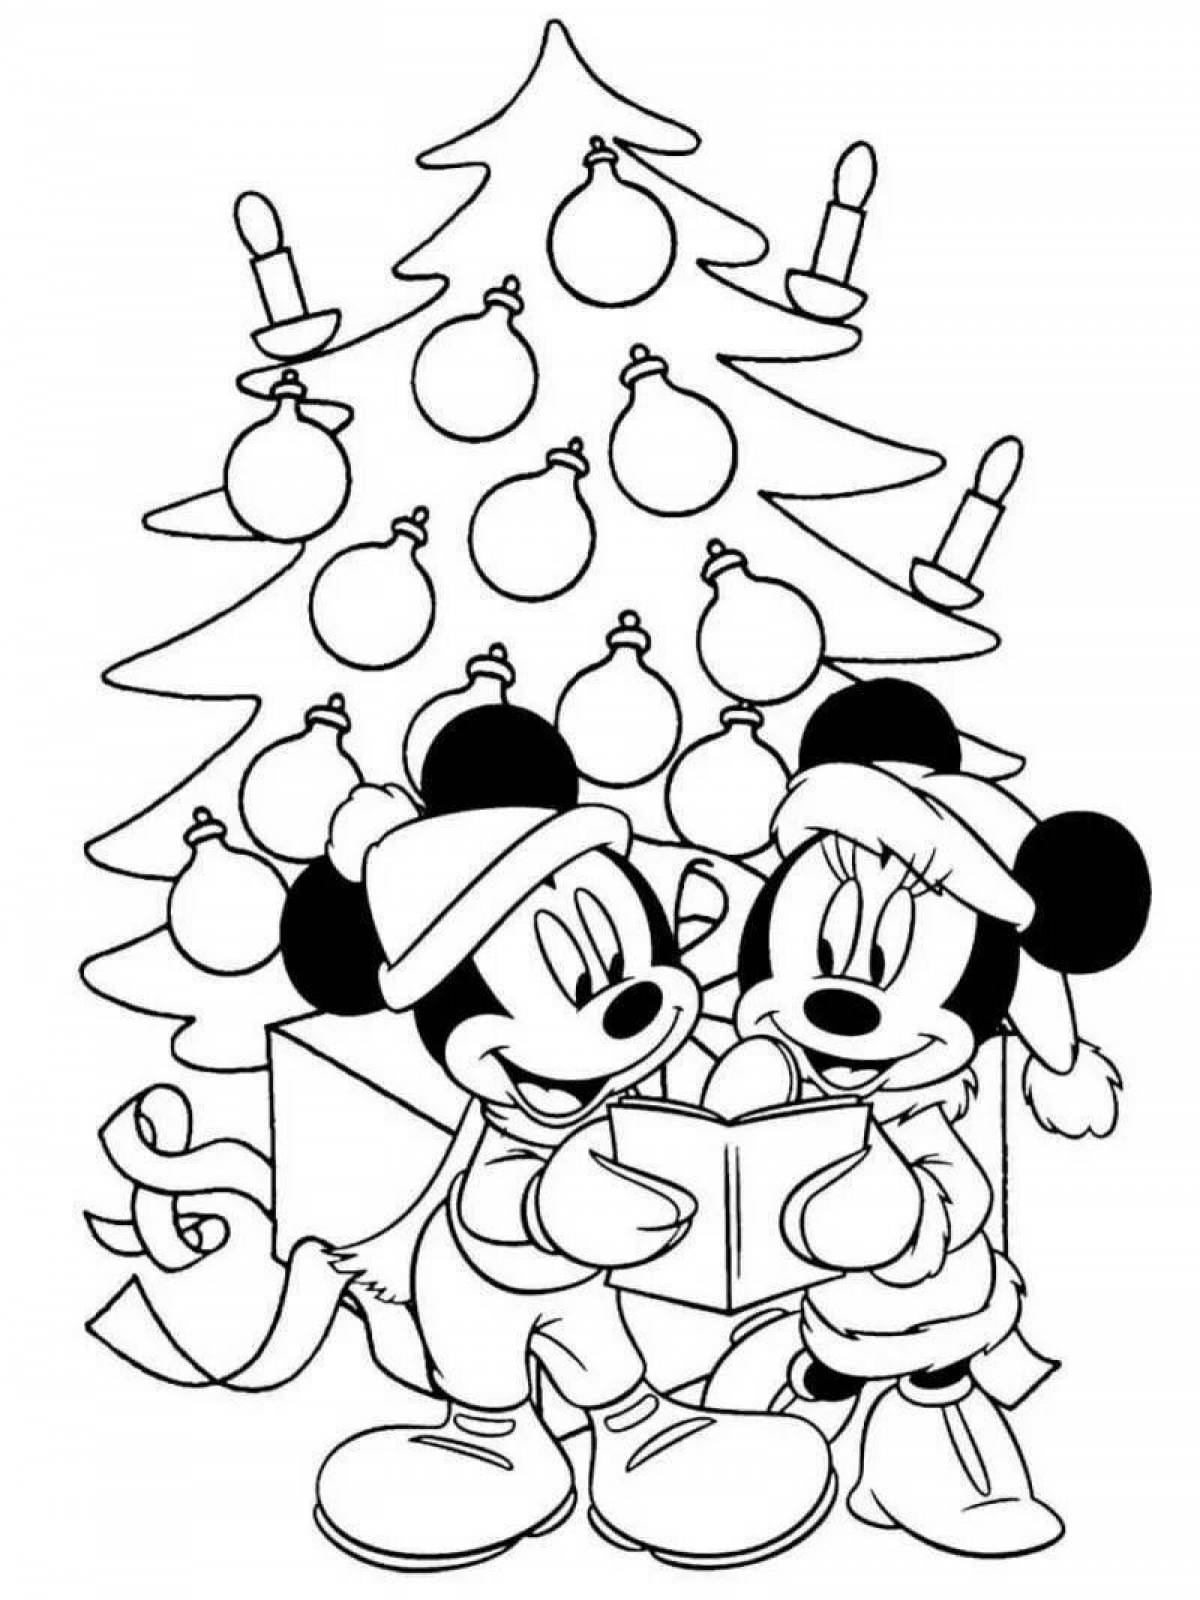 Coloring creative christmas characters